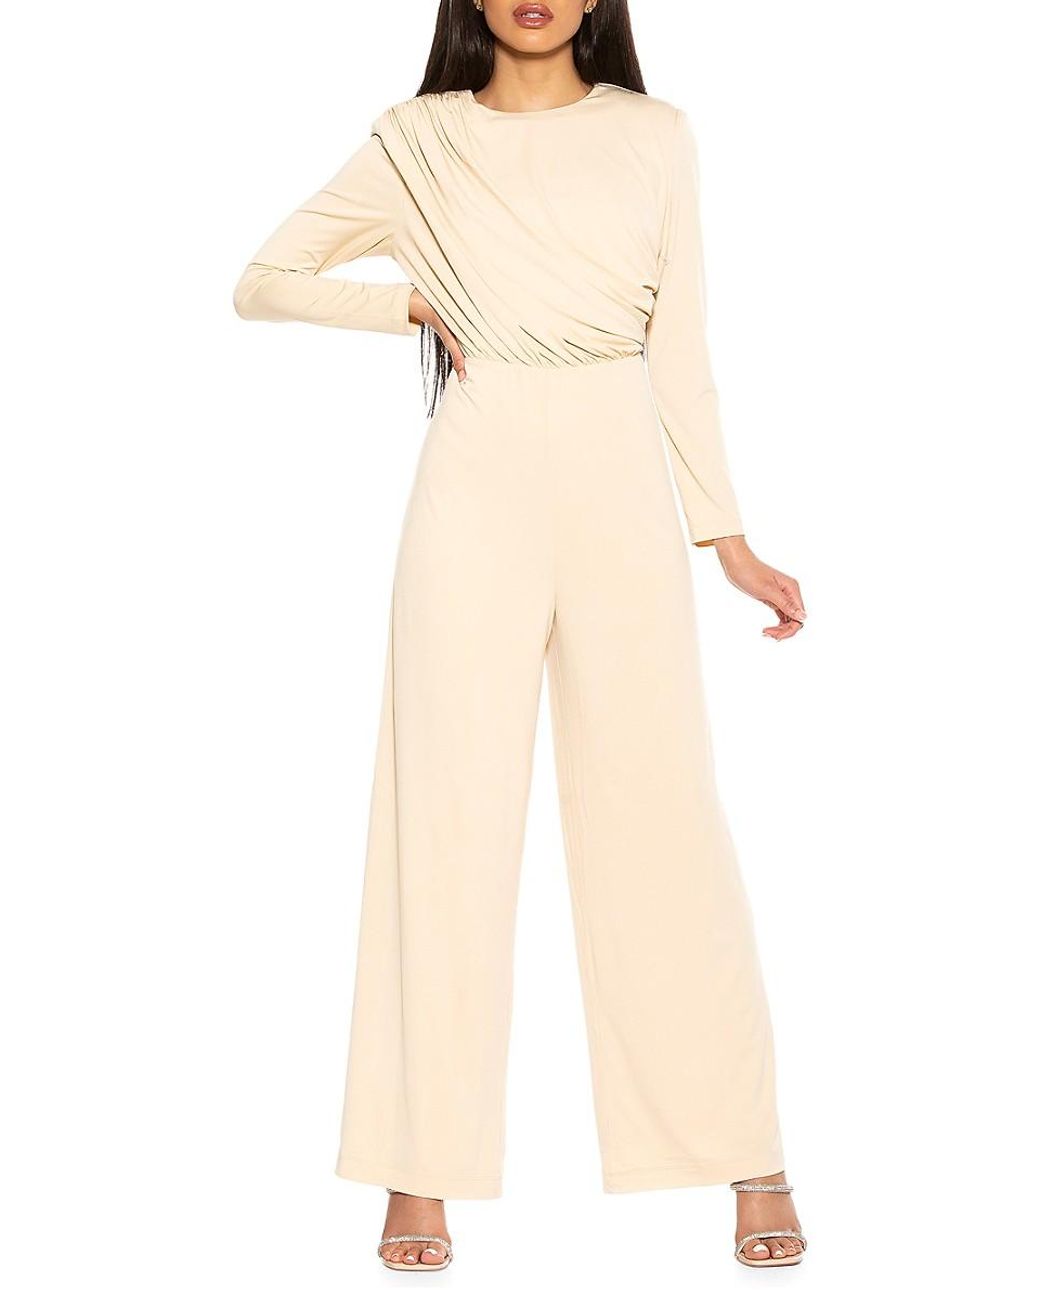 Alexia Admor Ruched Wide-leg Jumpsuit in Natural | Lyst